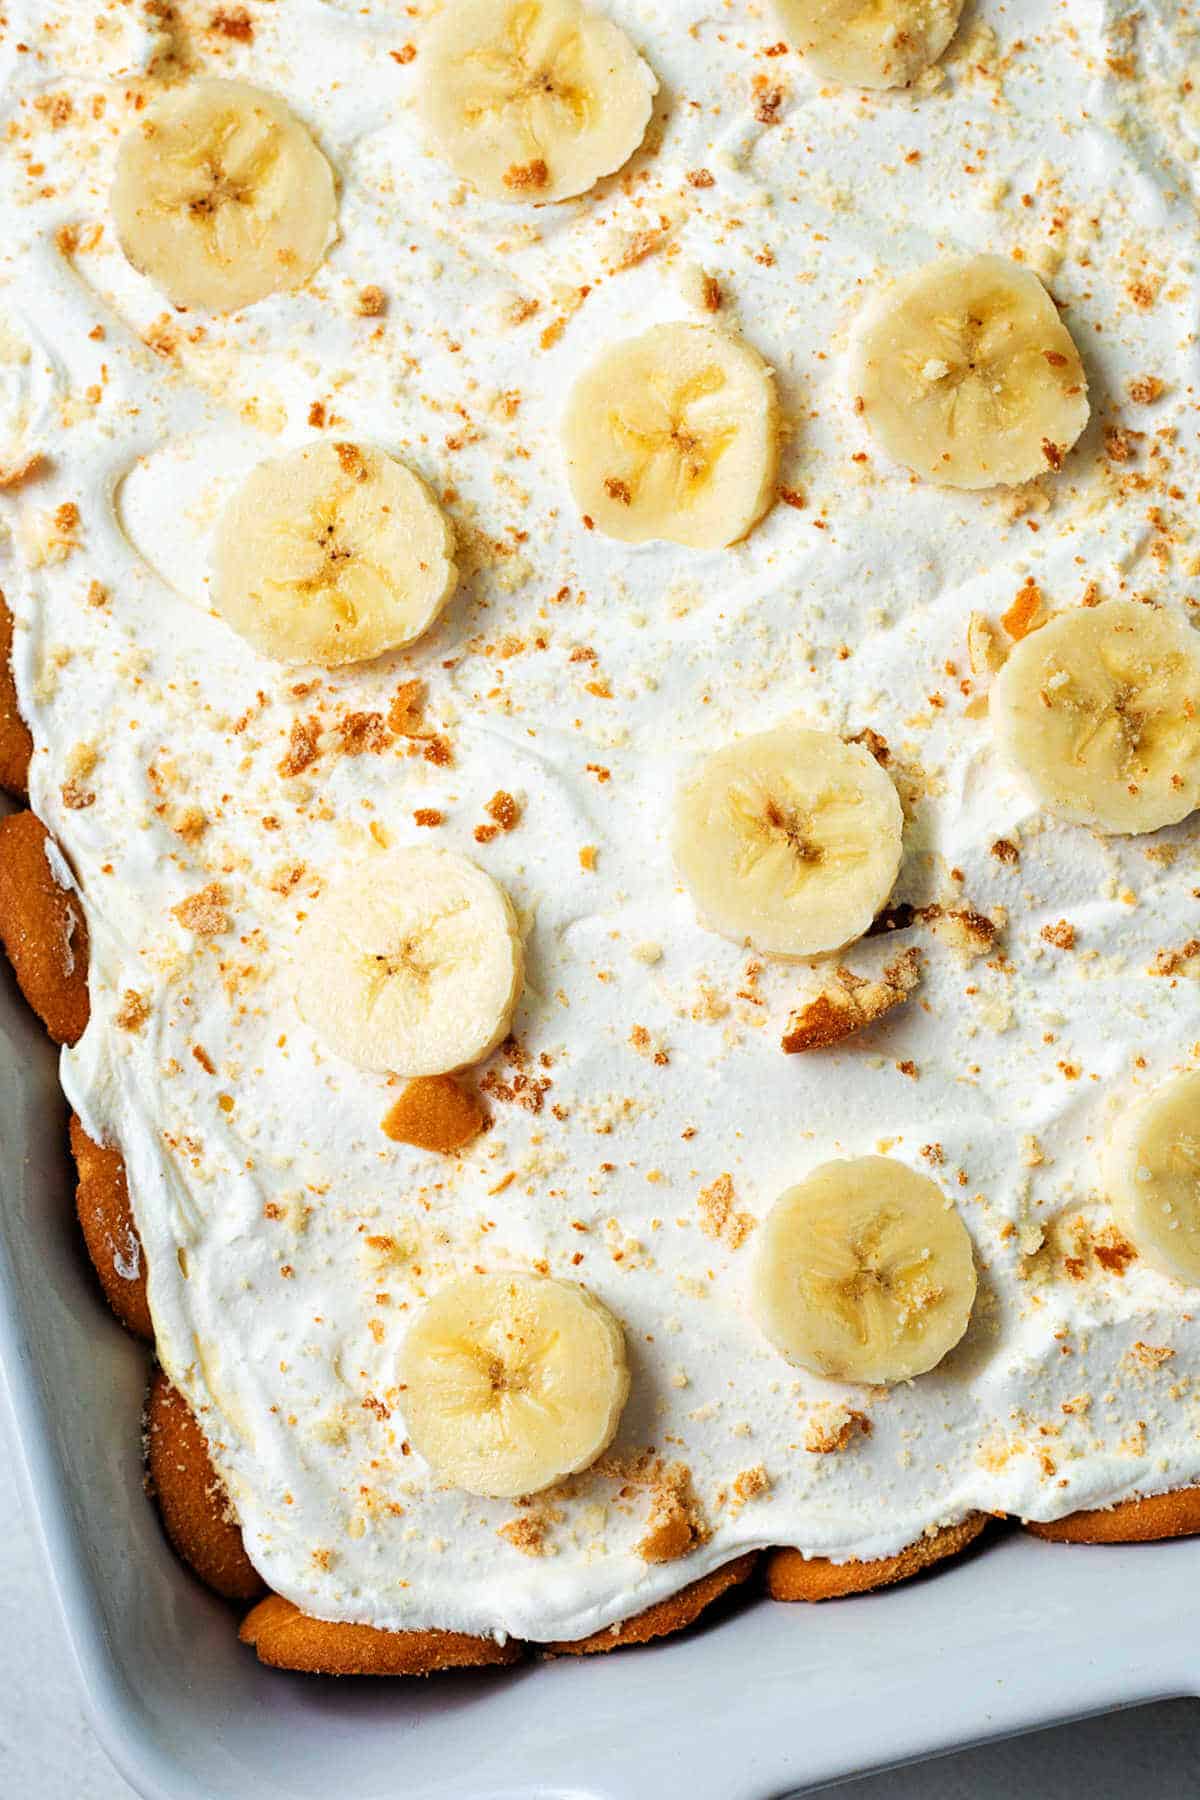 Banana Pudding in a baking dish topped with sliced bananas and crushed wafers.